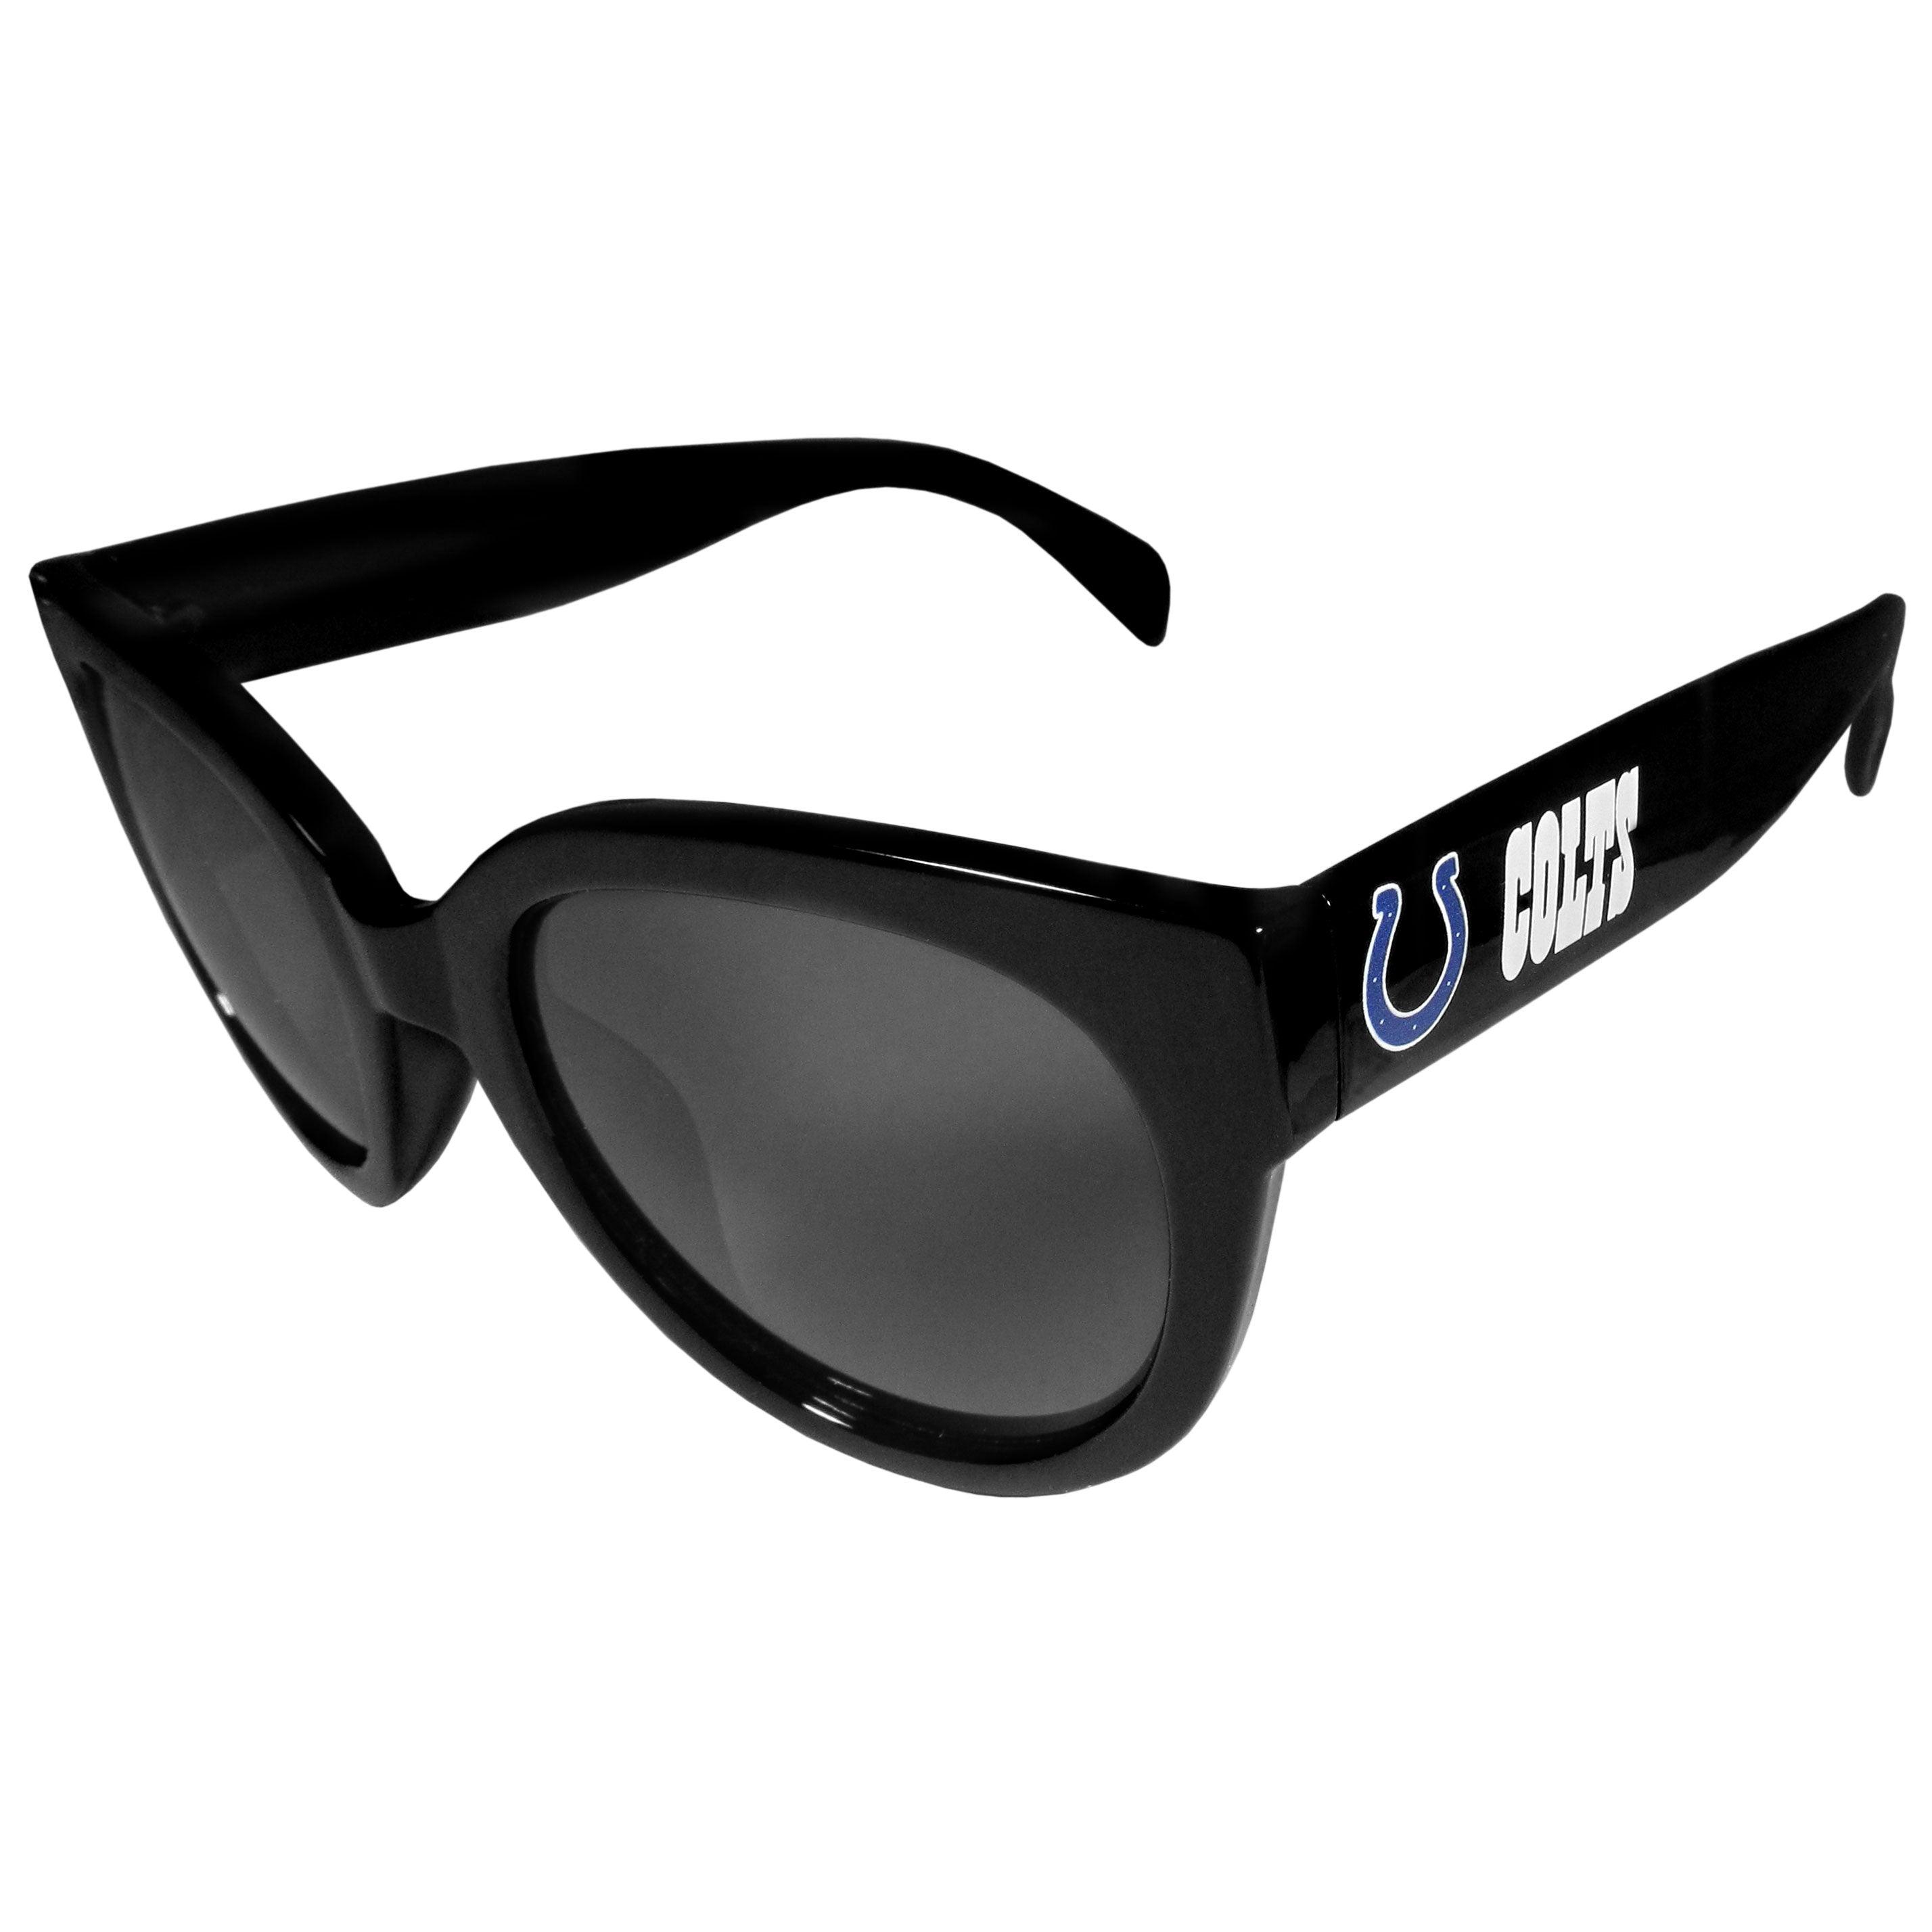 Indianapolis Colts Women's Sunglasses - Flyclothing LLC